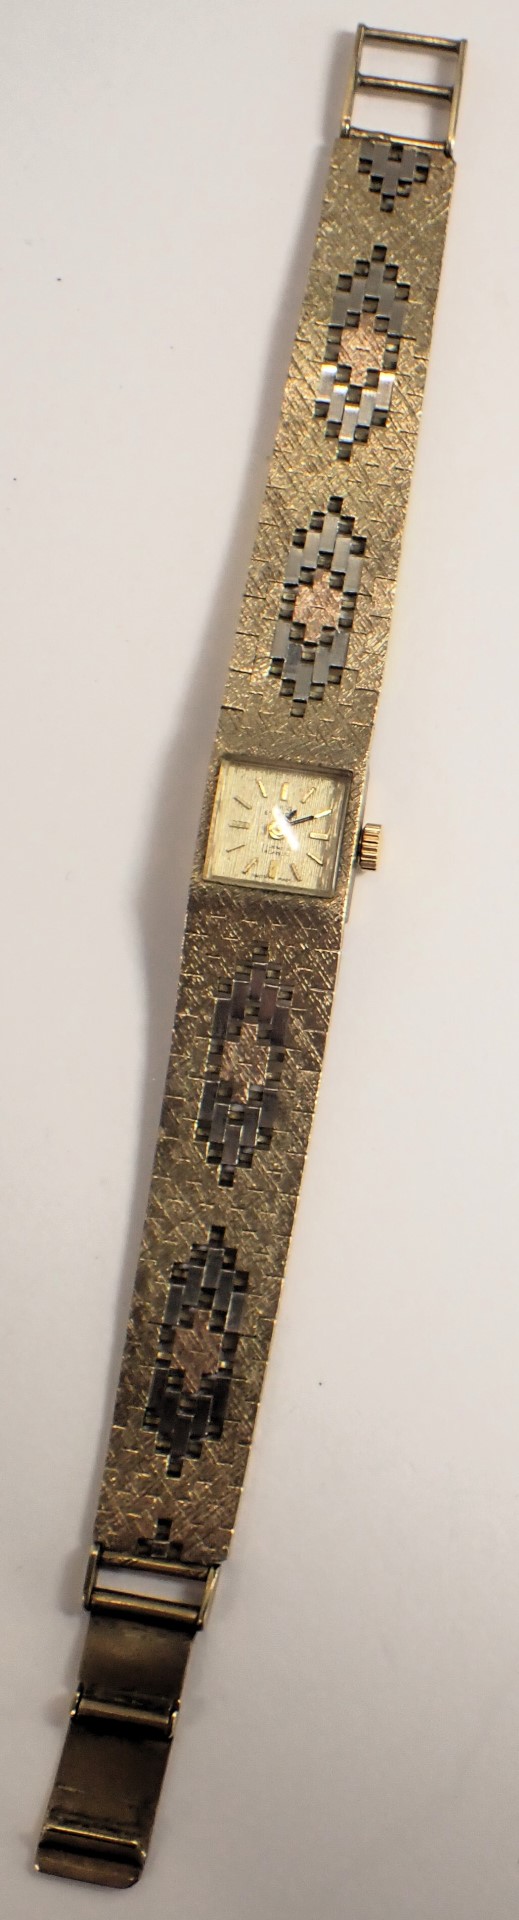 A Swiss Empire 9ct gold lady's wristwatch, the strap of bicolour design, with white, yellow and rose - Image 4 of 4